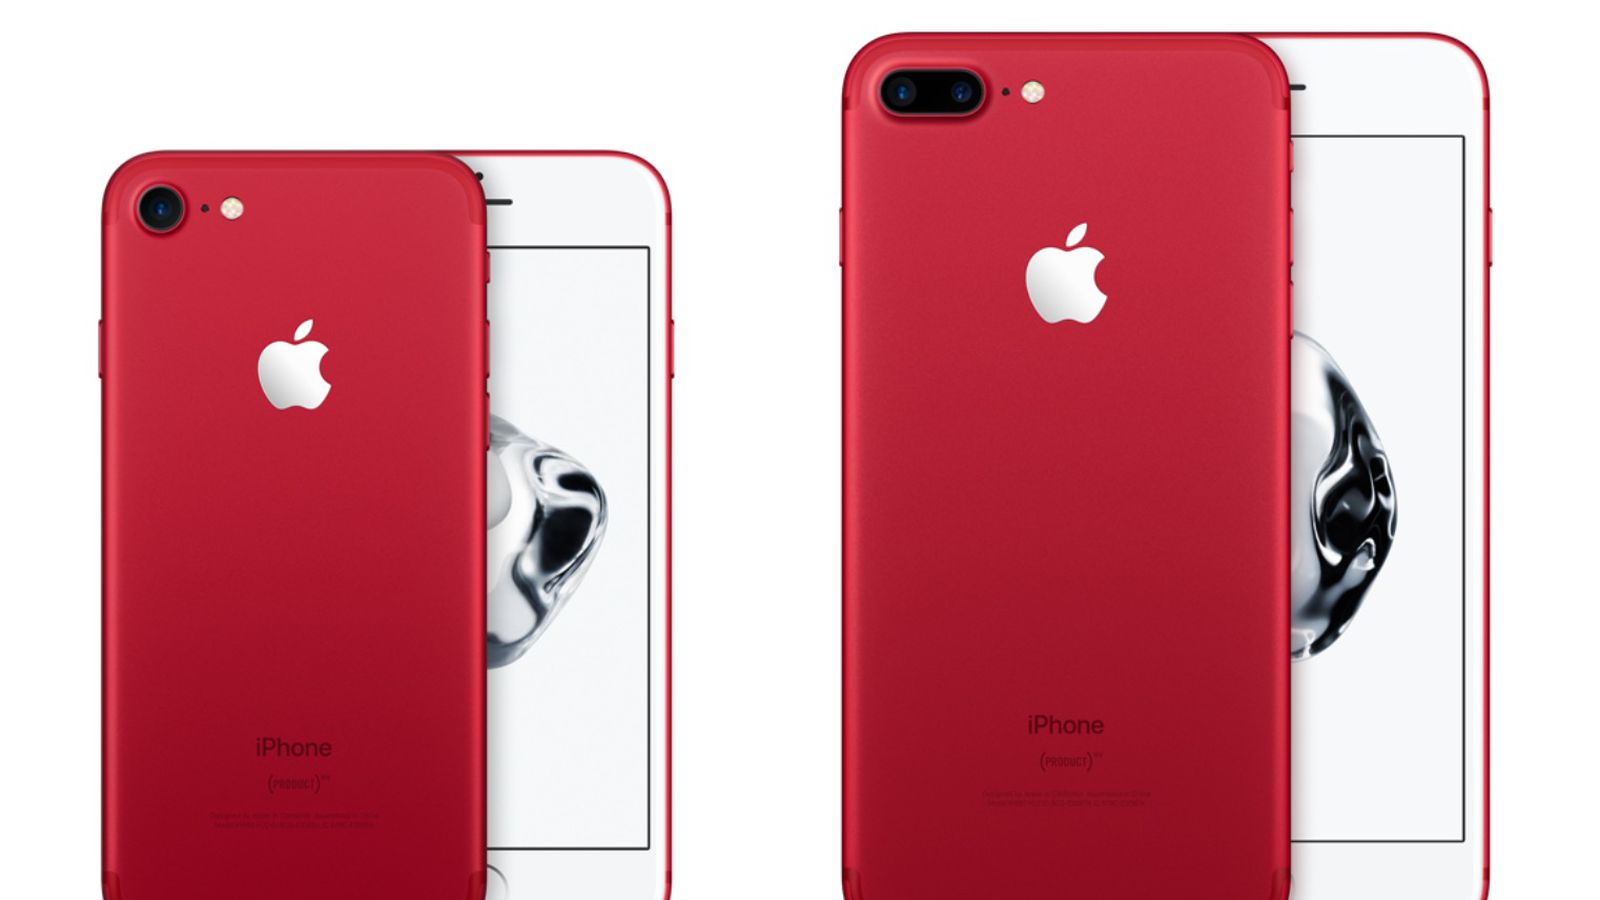 Apple Retires (PRODUCT)RED iPhone 7 and iPhone 7 Plus Models 